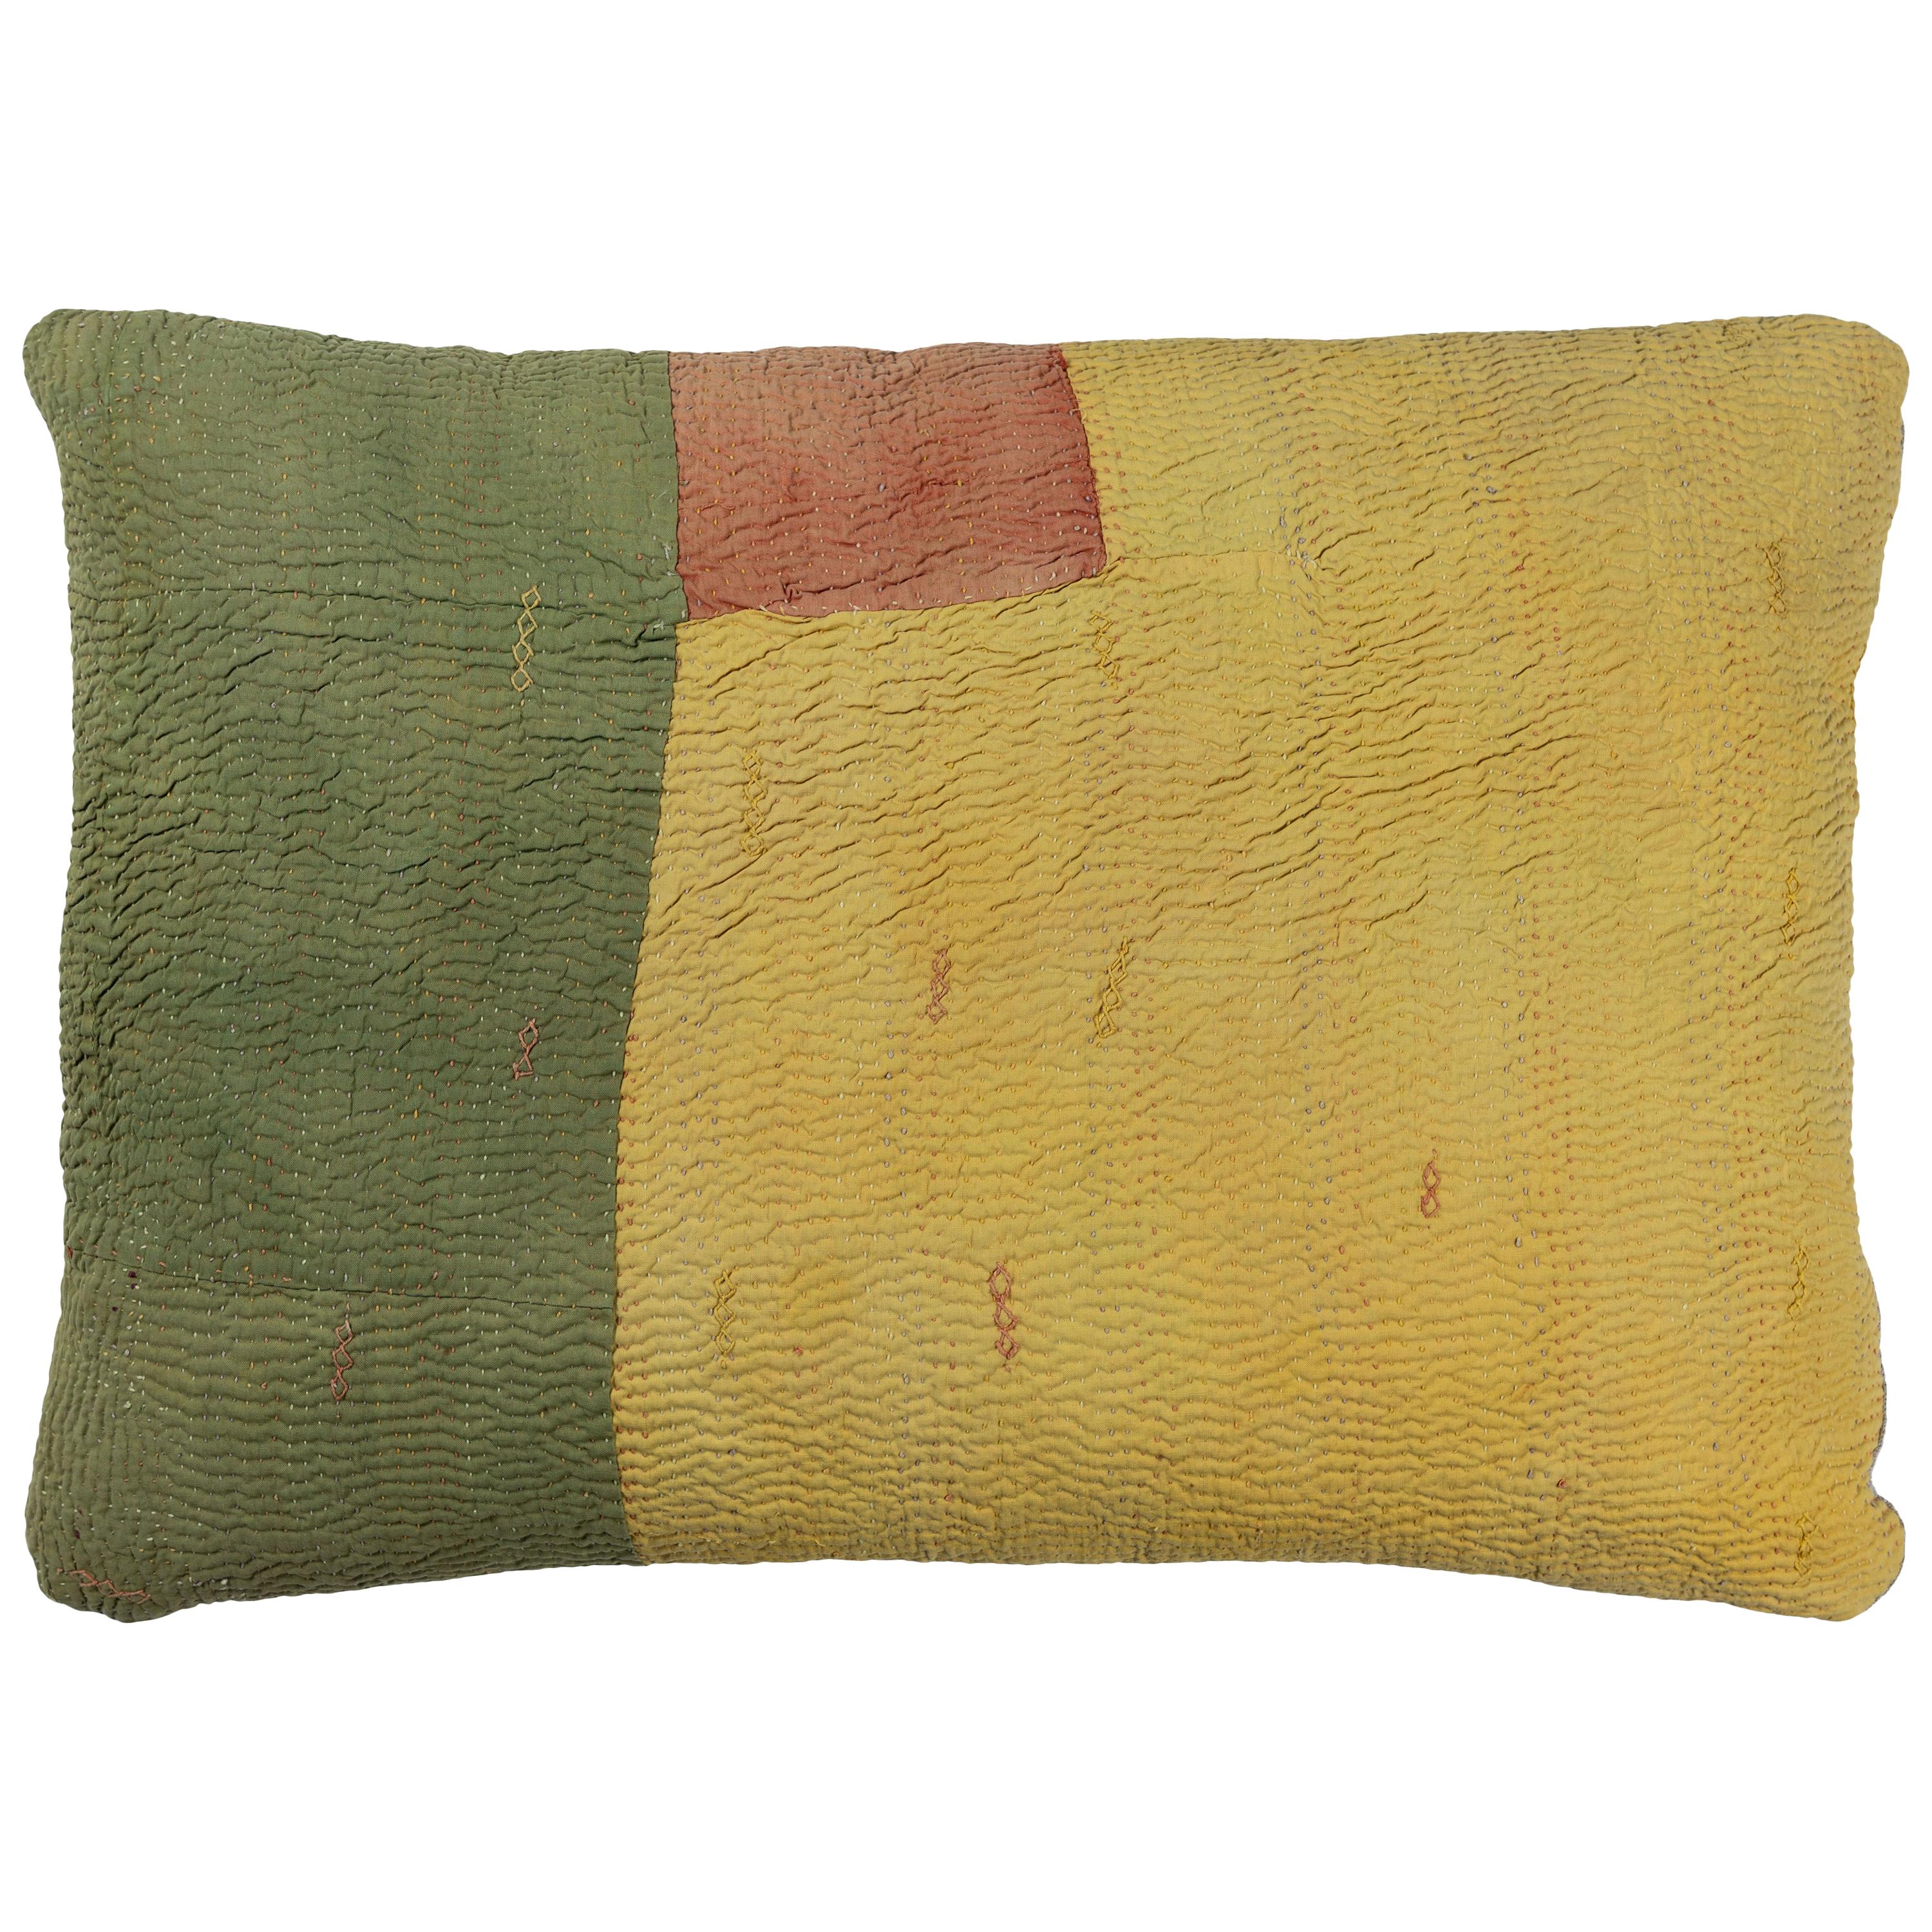 Kantha Quilt Pillow For Sale